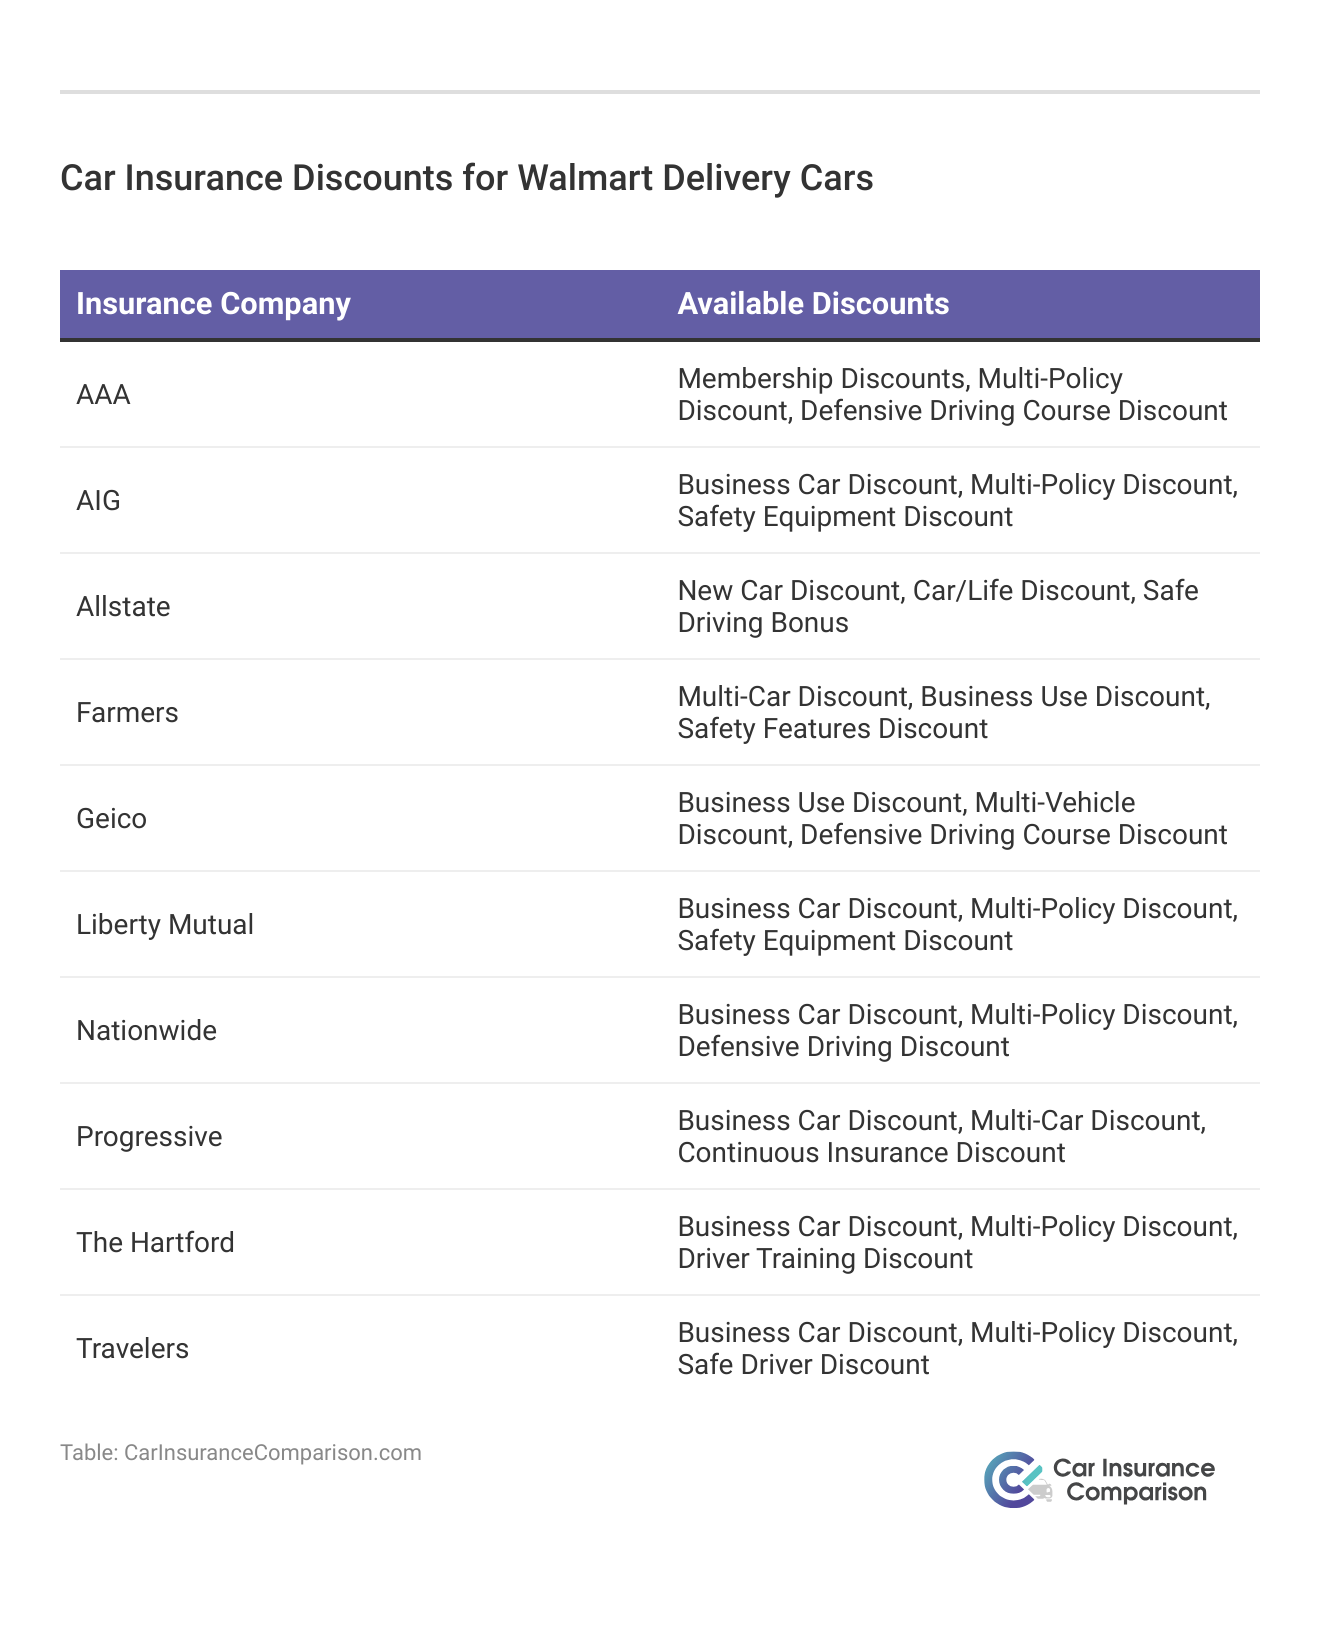 <h3>Car Insurance Discounts for Walmart Delivery Cars</h3> 